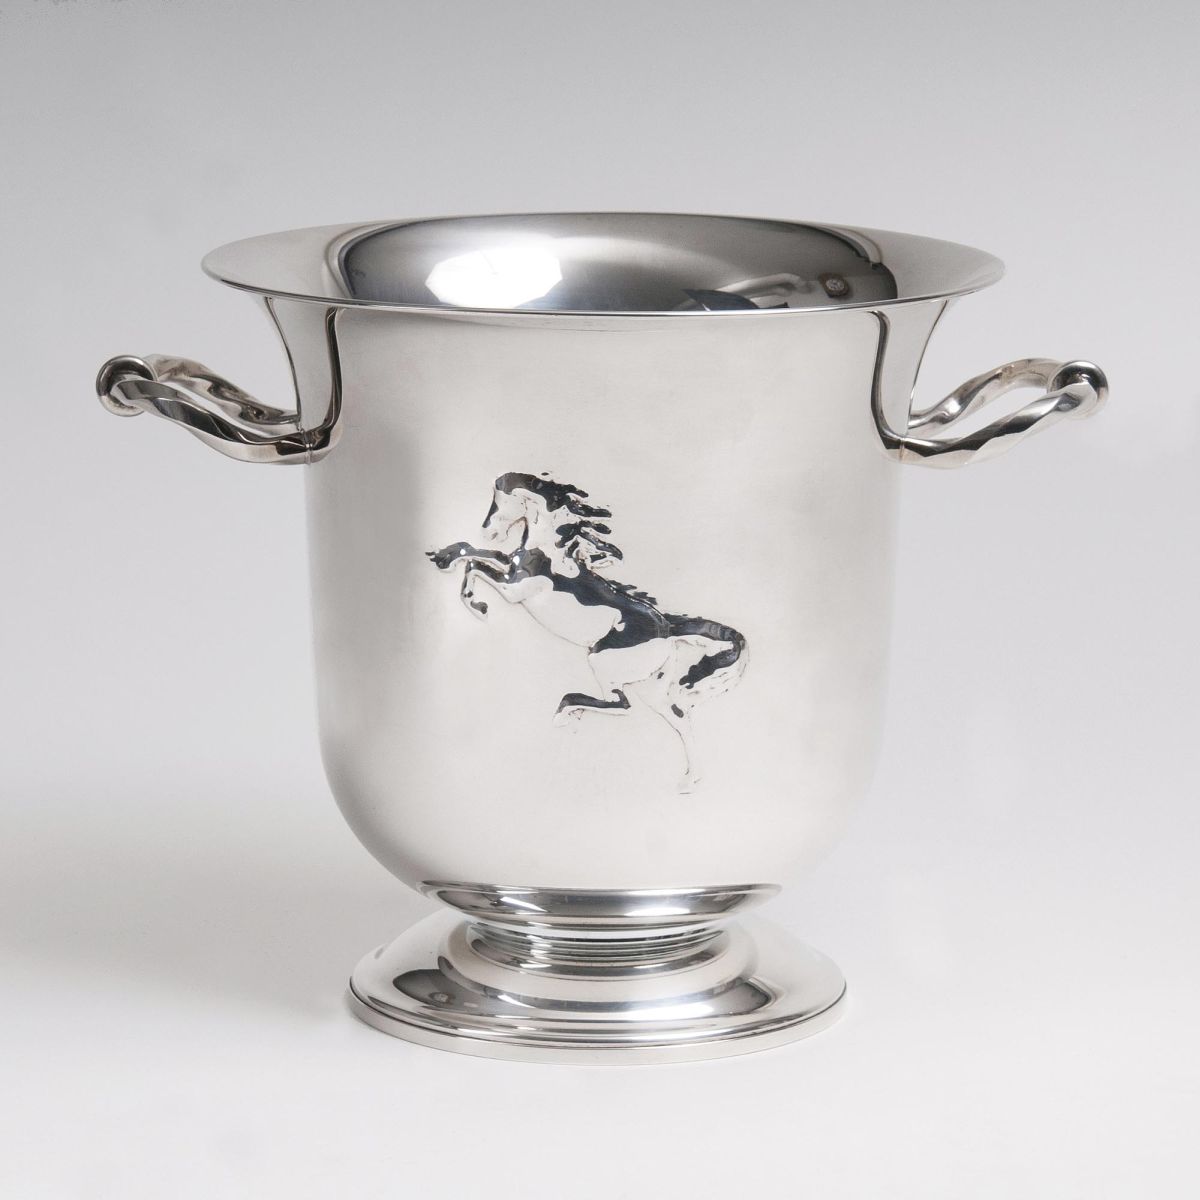 A Champagne Bucket with Horse Decor